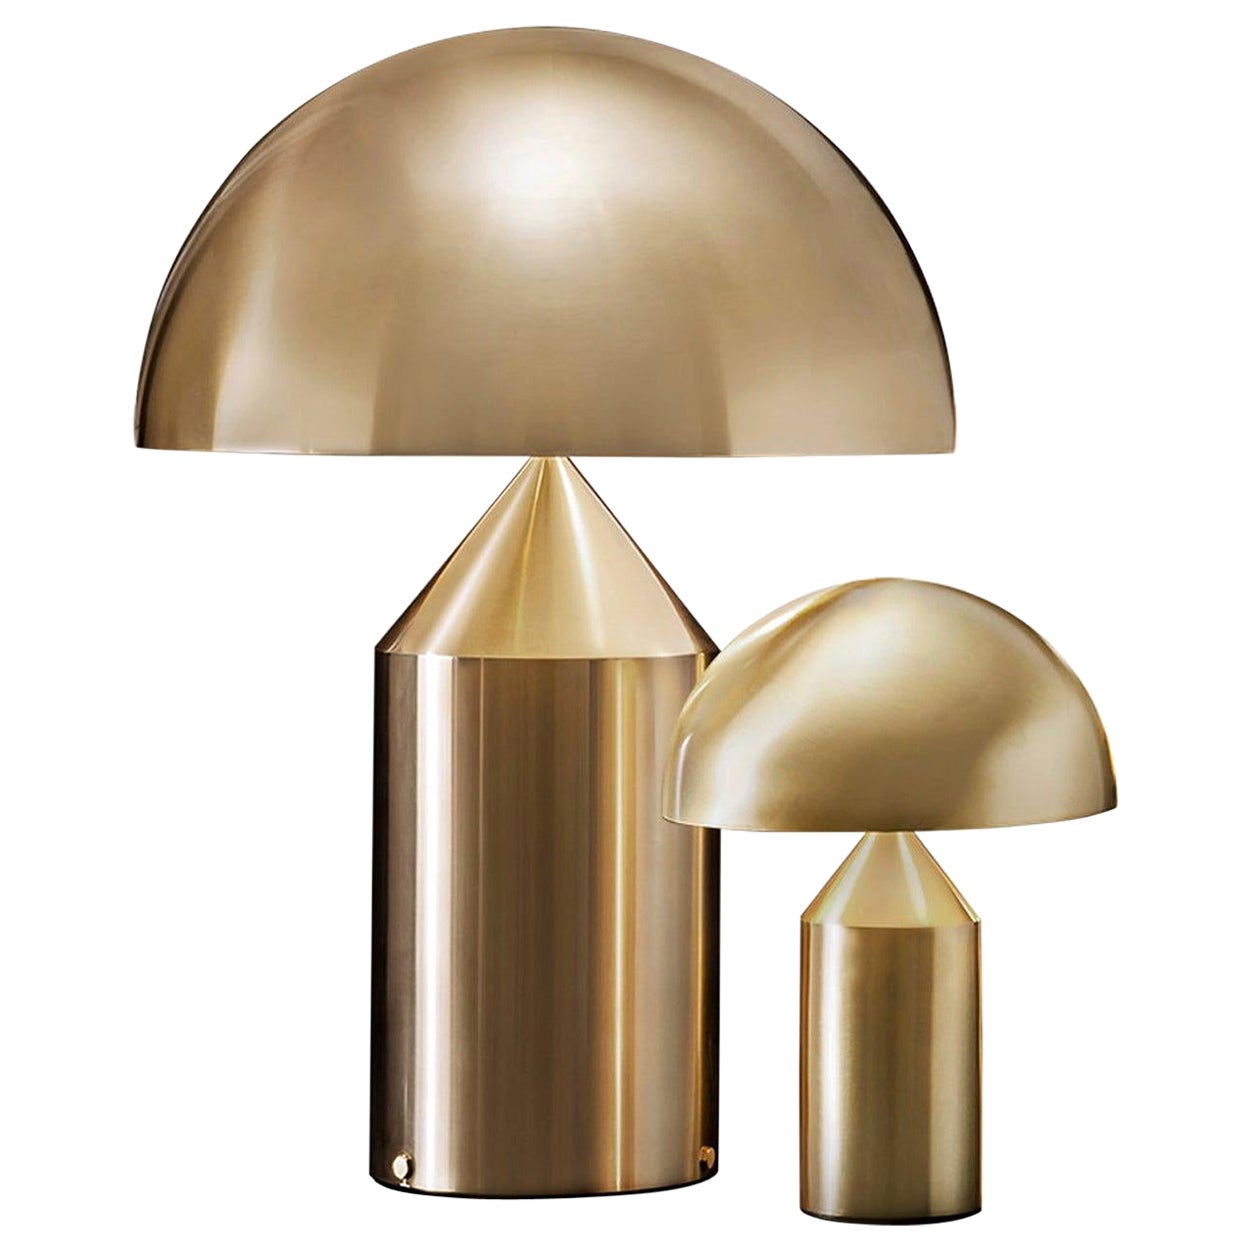 Set of 'Atollo' Large and Small Gold Table Lamp Designed by Vico Magistretti